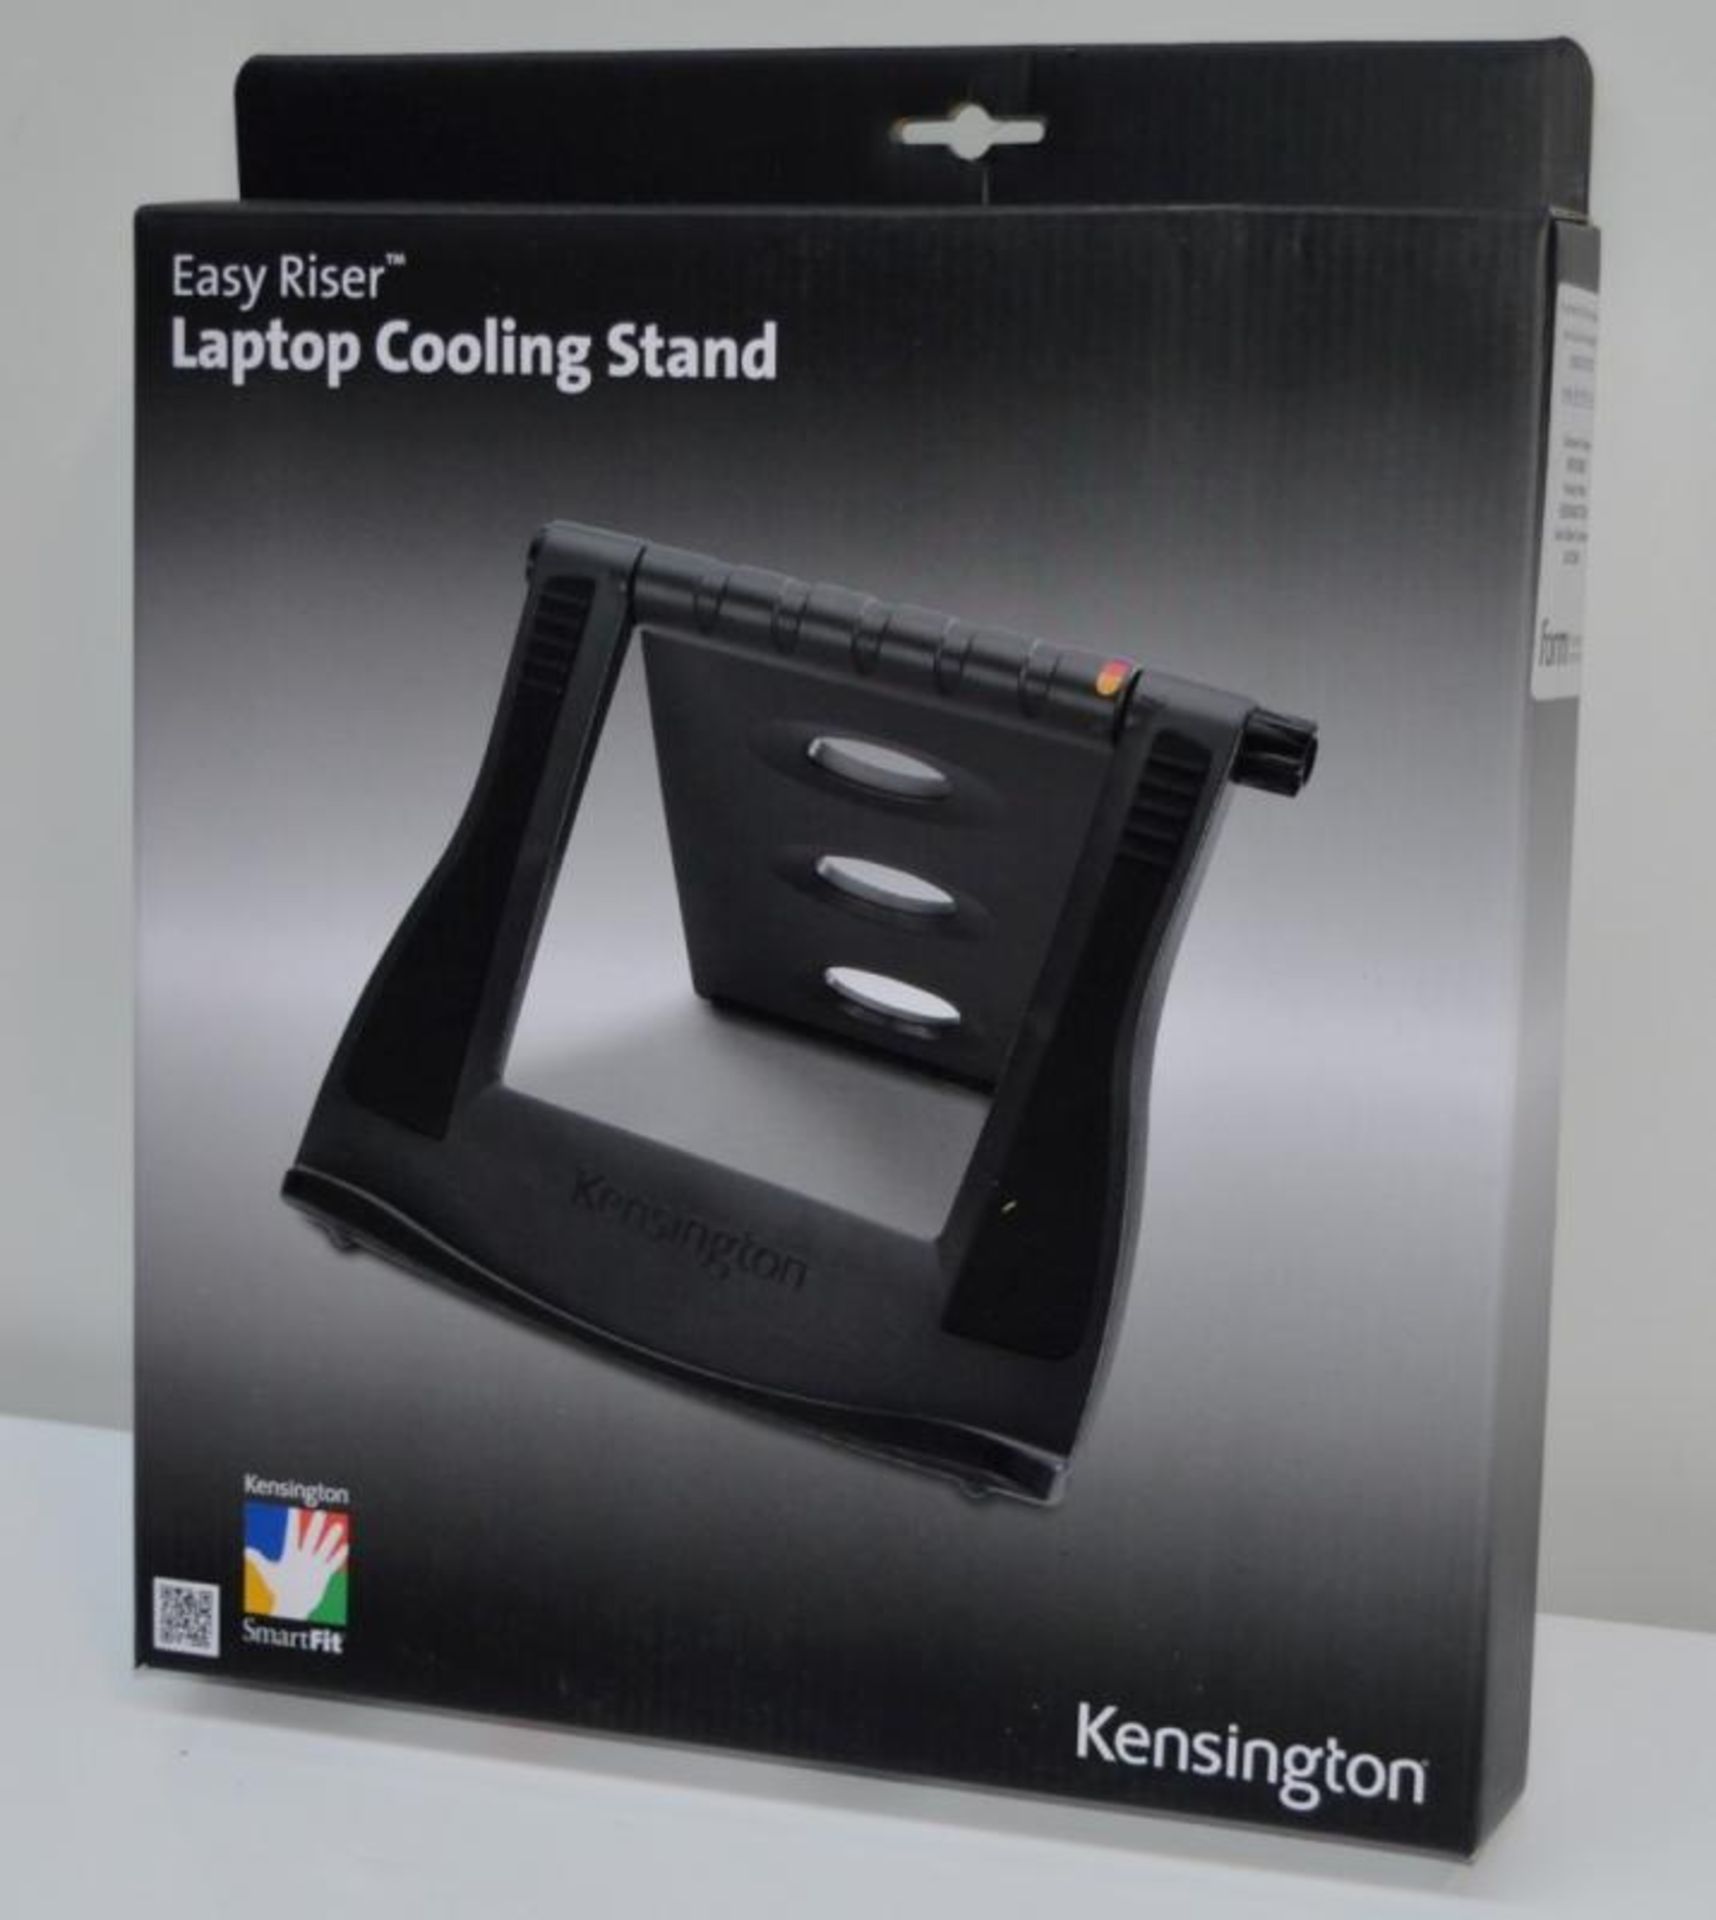 1 x Kensington Easy Riser Laptop Cooling Stand - Brand New Boxed Stock - CL400 - Location: Altrincha